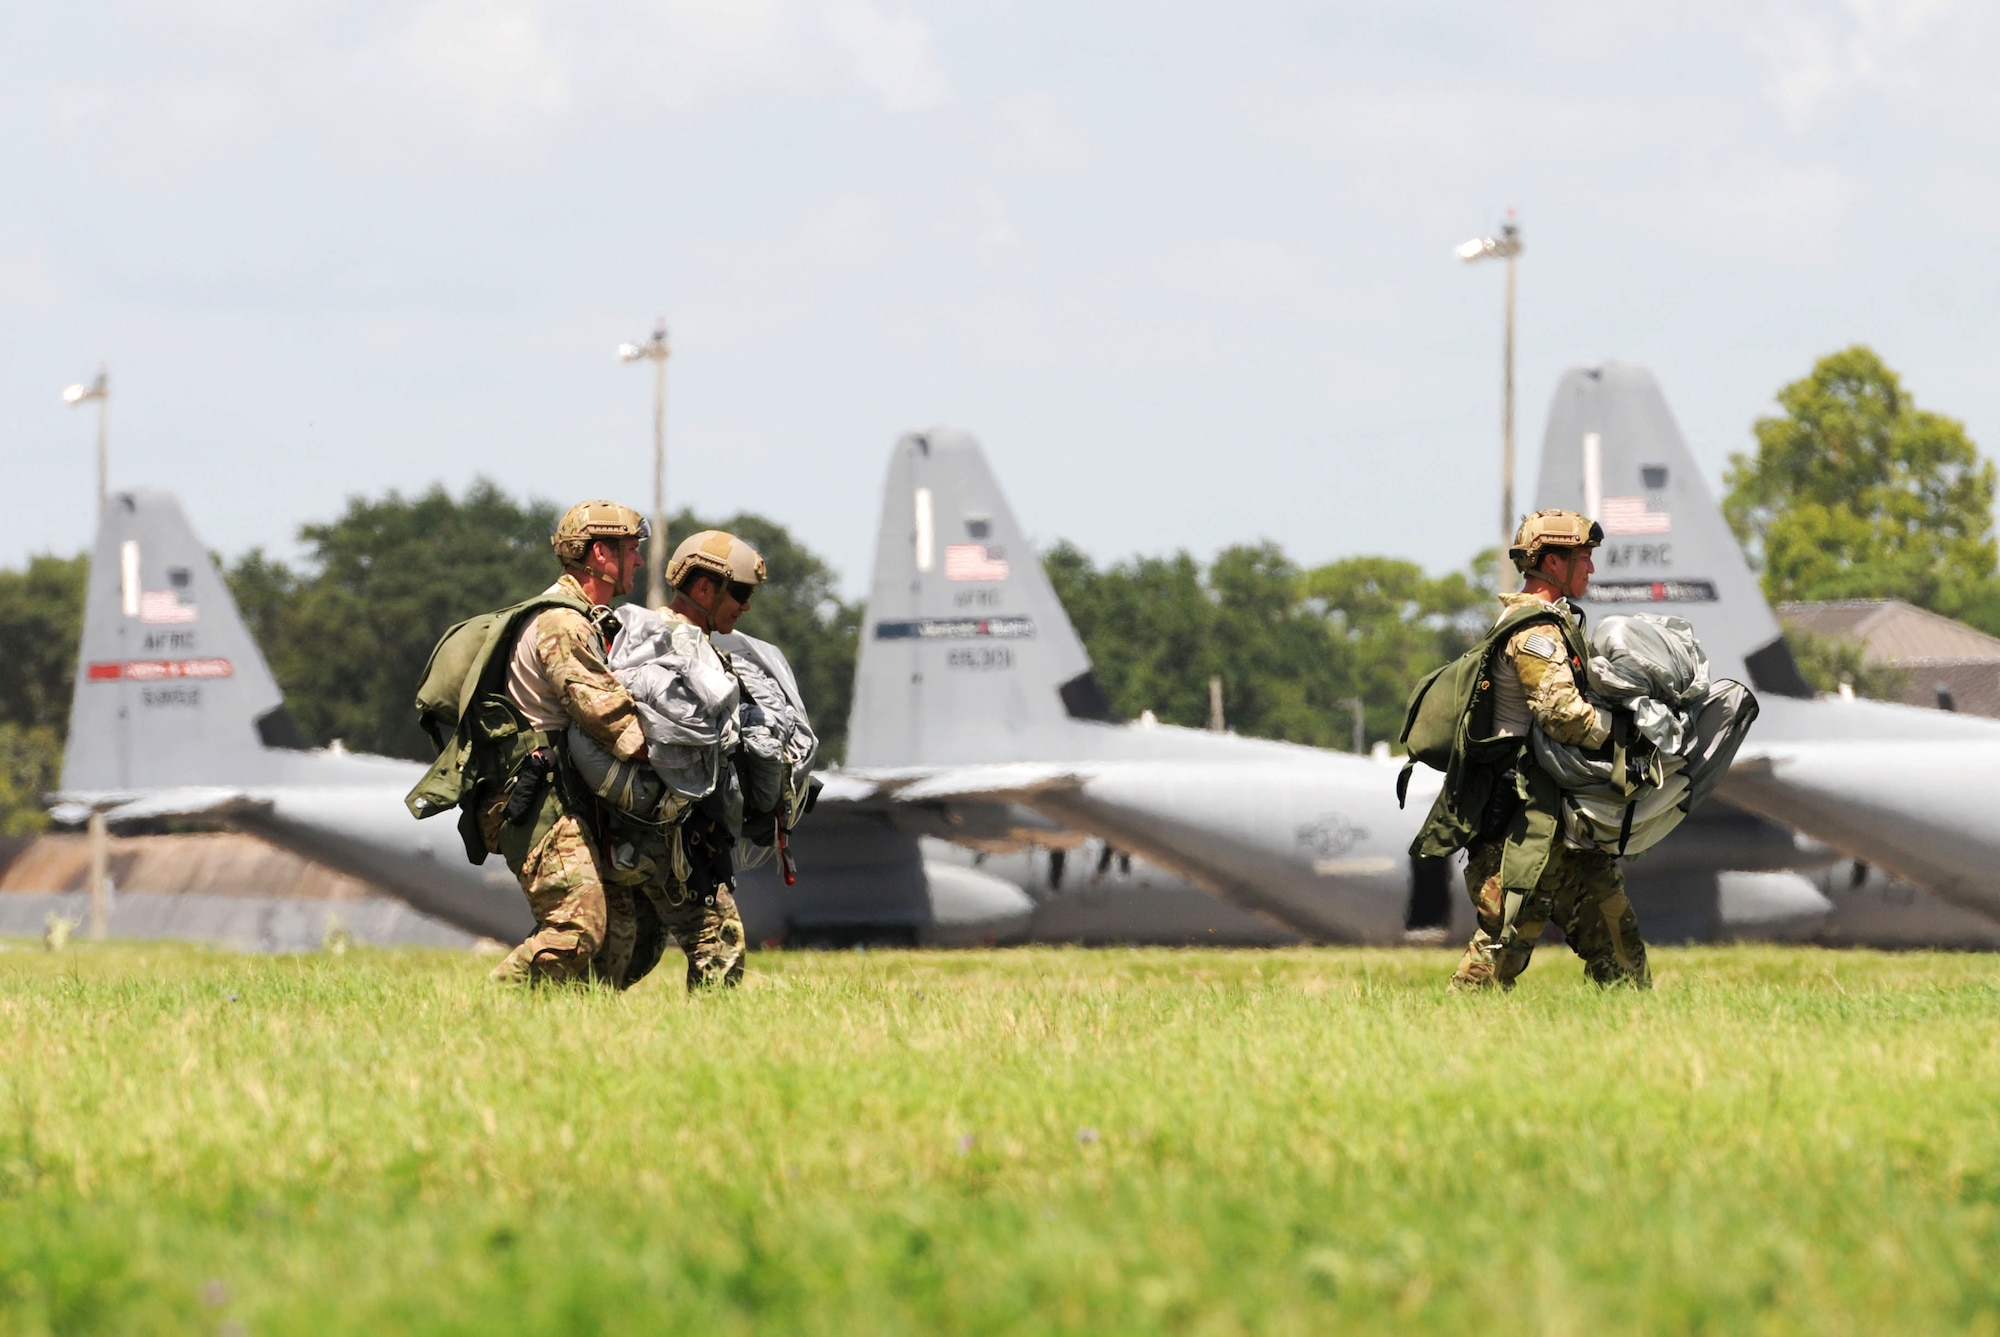 Special Tactics Airmen from the 720th Special Tactics Group, Hurlburt Field, Fla., complete a successful parachute landing on the flight line during a free fall training exercise July 28, 2016, on Keesler Air Force Base, Miss. The Air Force's special operations ground force uses freefall as an infiltration method to access areas where aircraft cannot land. (U.S. Air Force photo by Kemberly Groue/Released)
